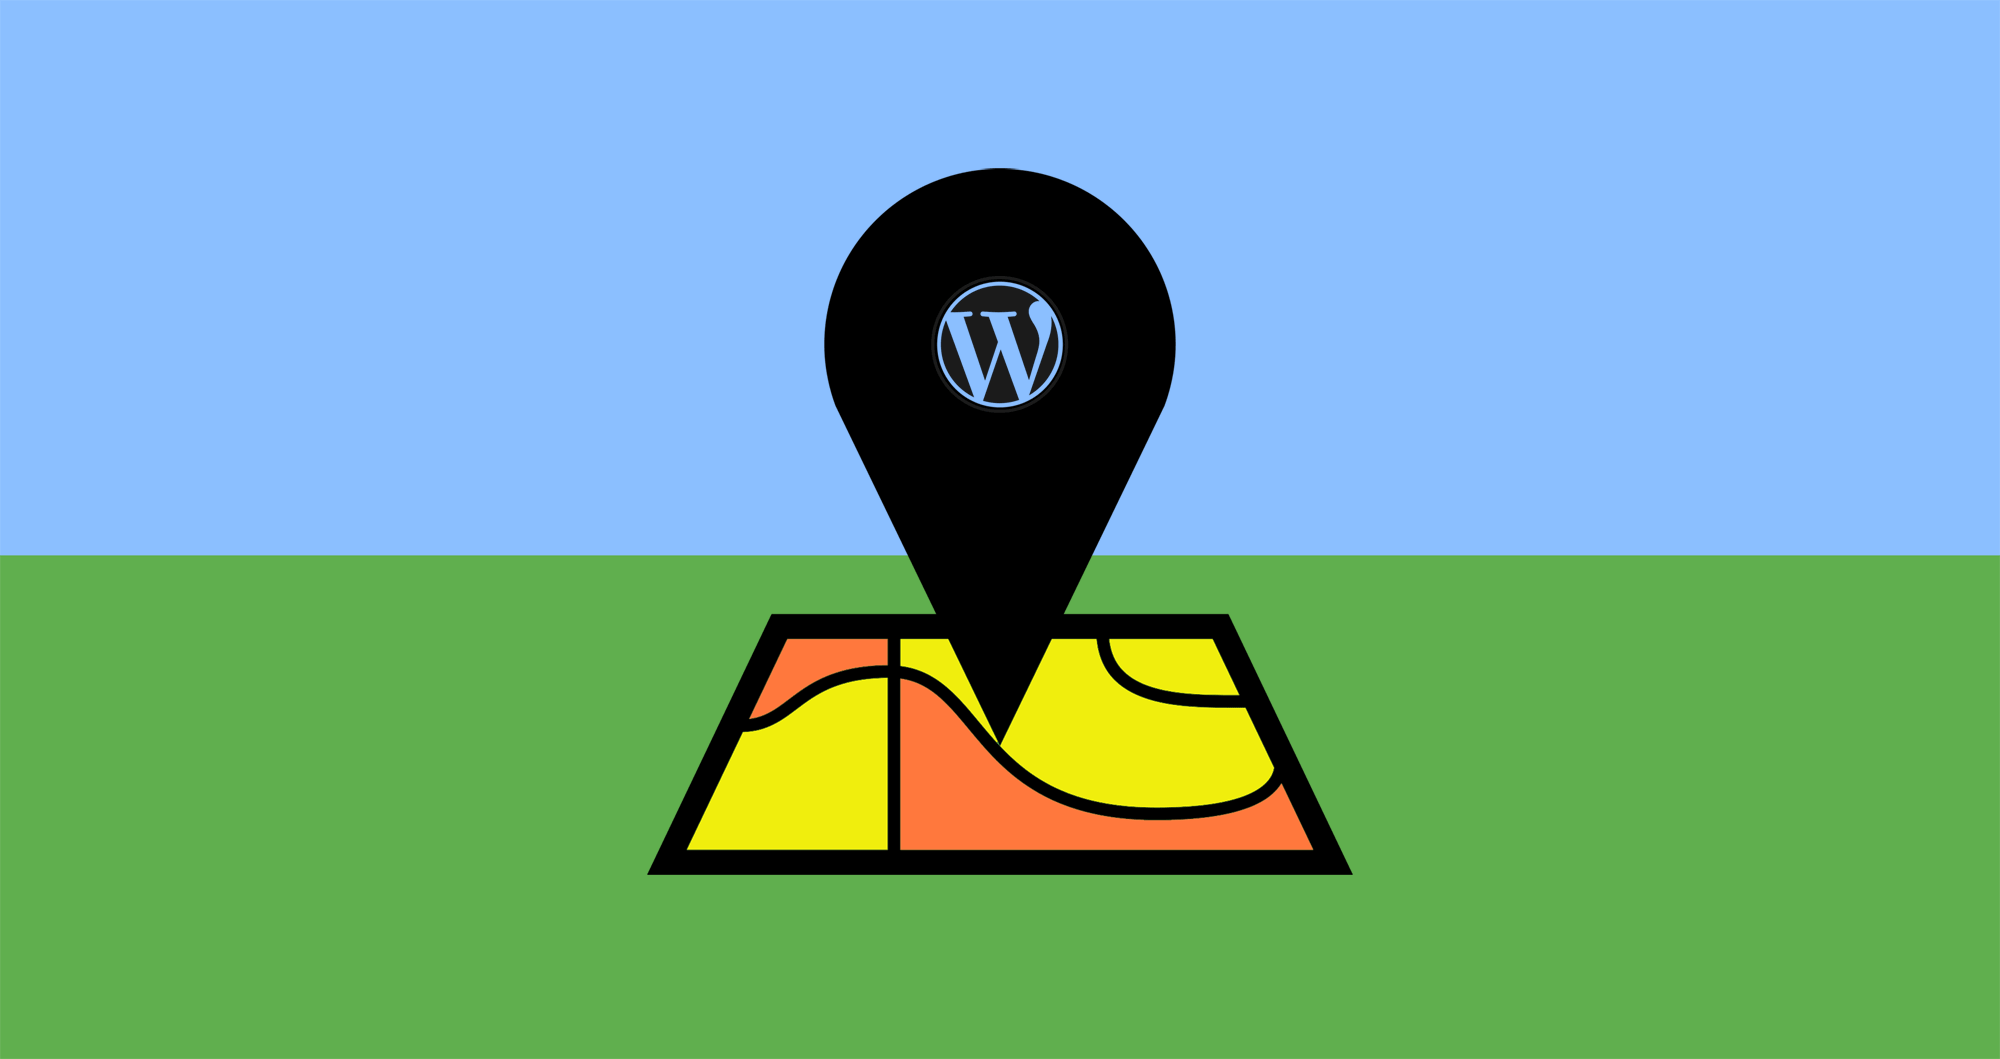 Local WordPress development strategies and transparency in business — Draft podcast